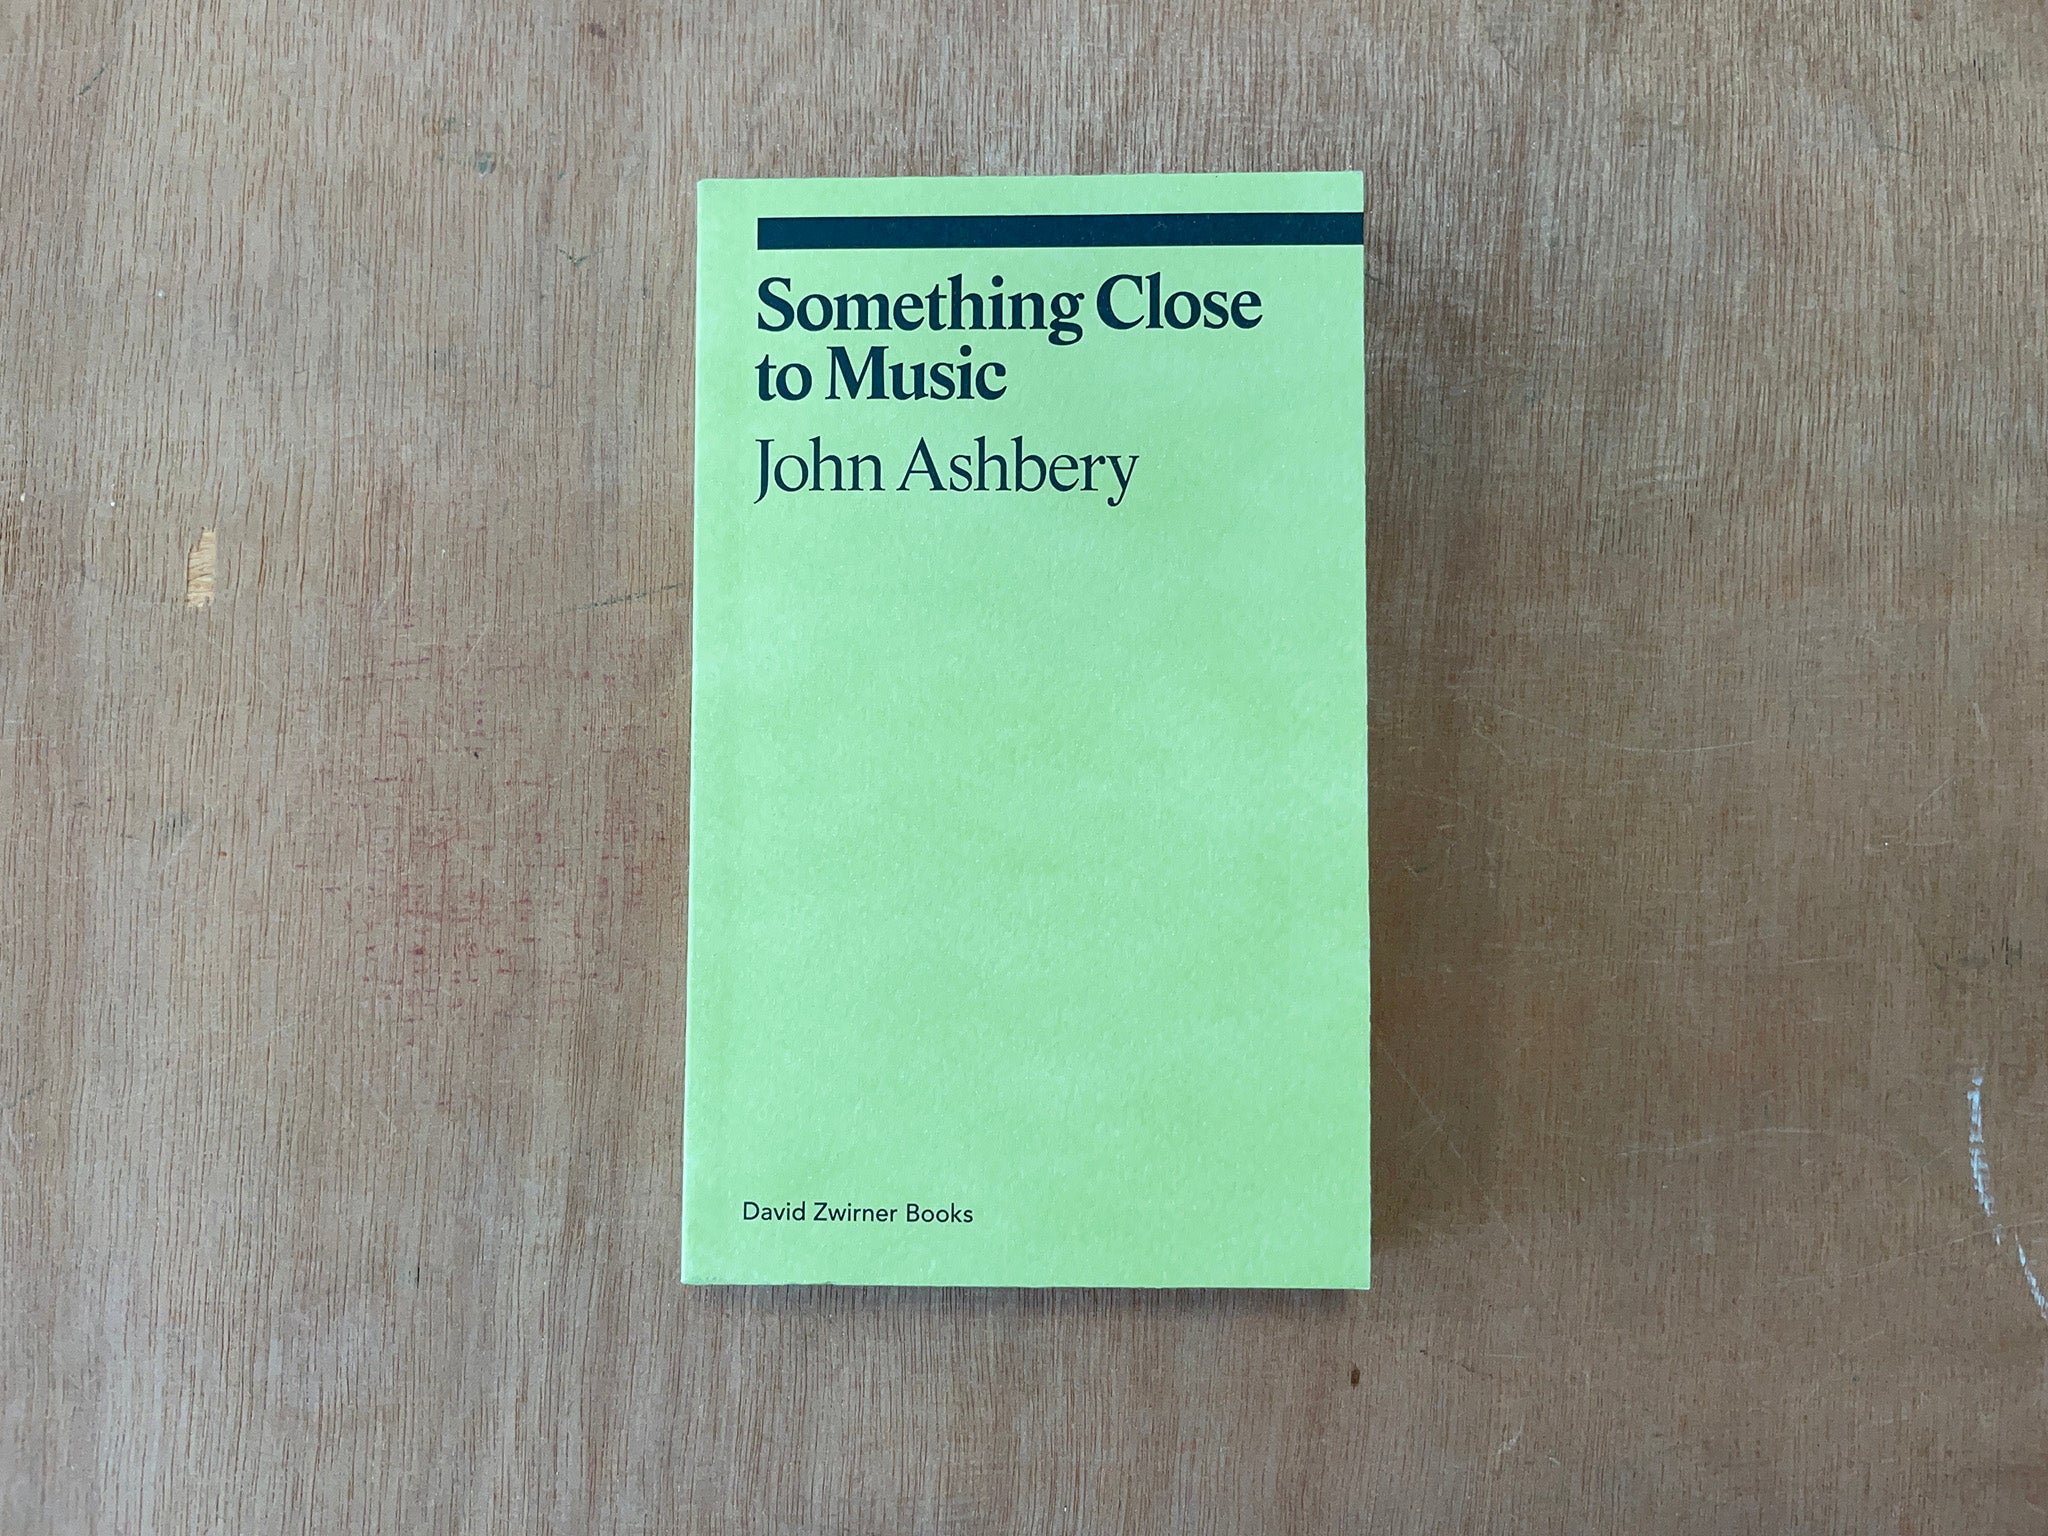 SOMETHING CLOSE TO MUSIC by John Ashbery